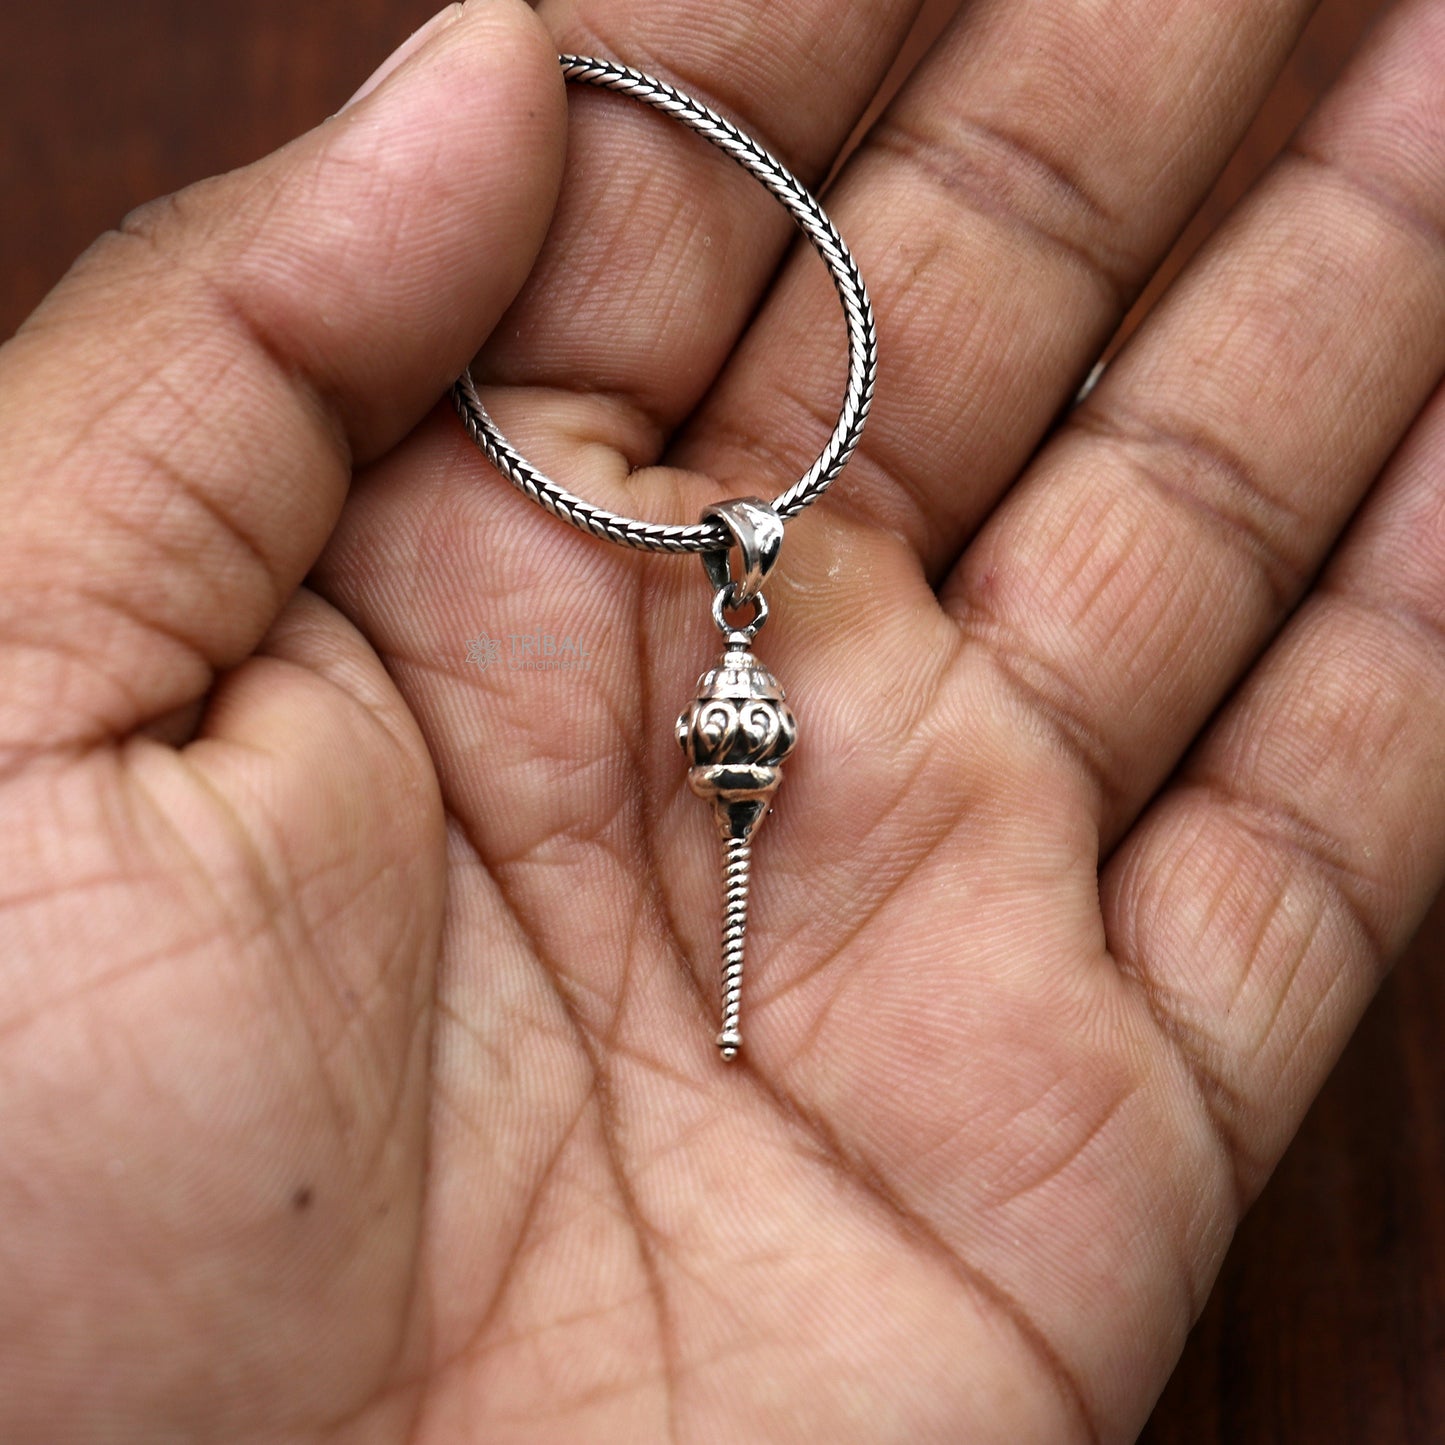 Unique Lord hanuman mace/gada 925 sterling silver small pendant, Wonderful Pendant for unisex gifting  necklace nsp666 - TRIBAL ORNAMENTS